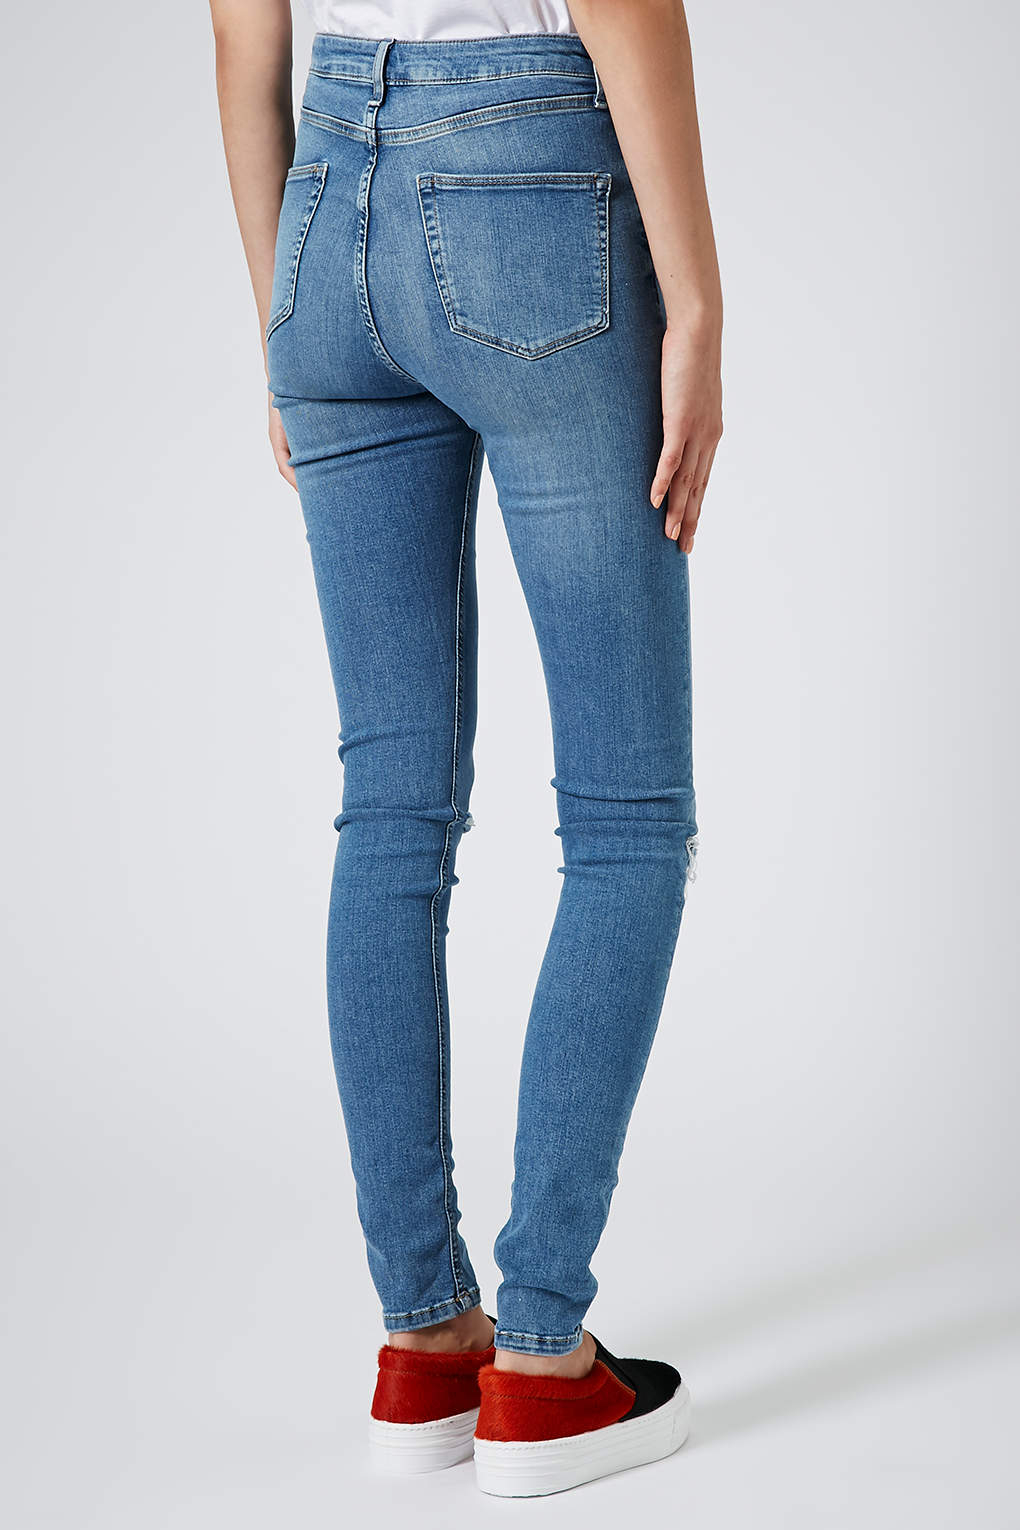 top shop tall jeans